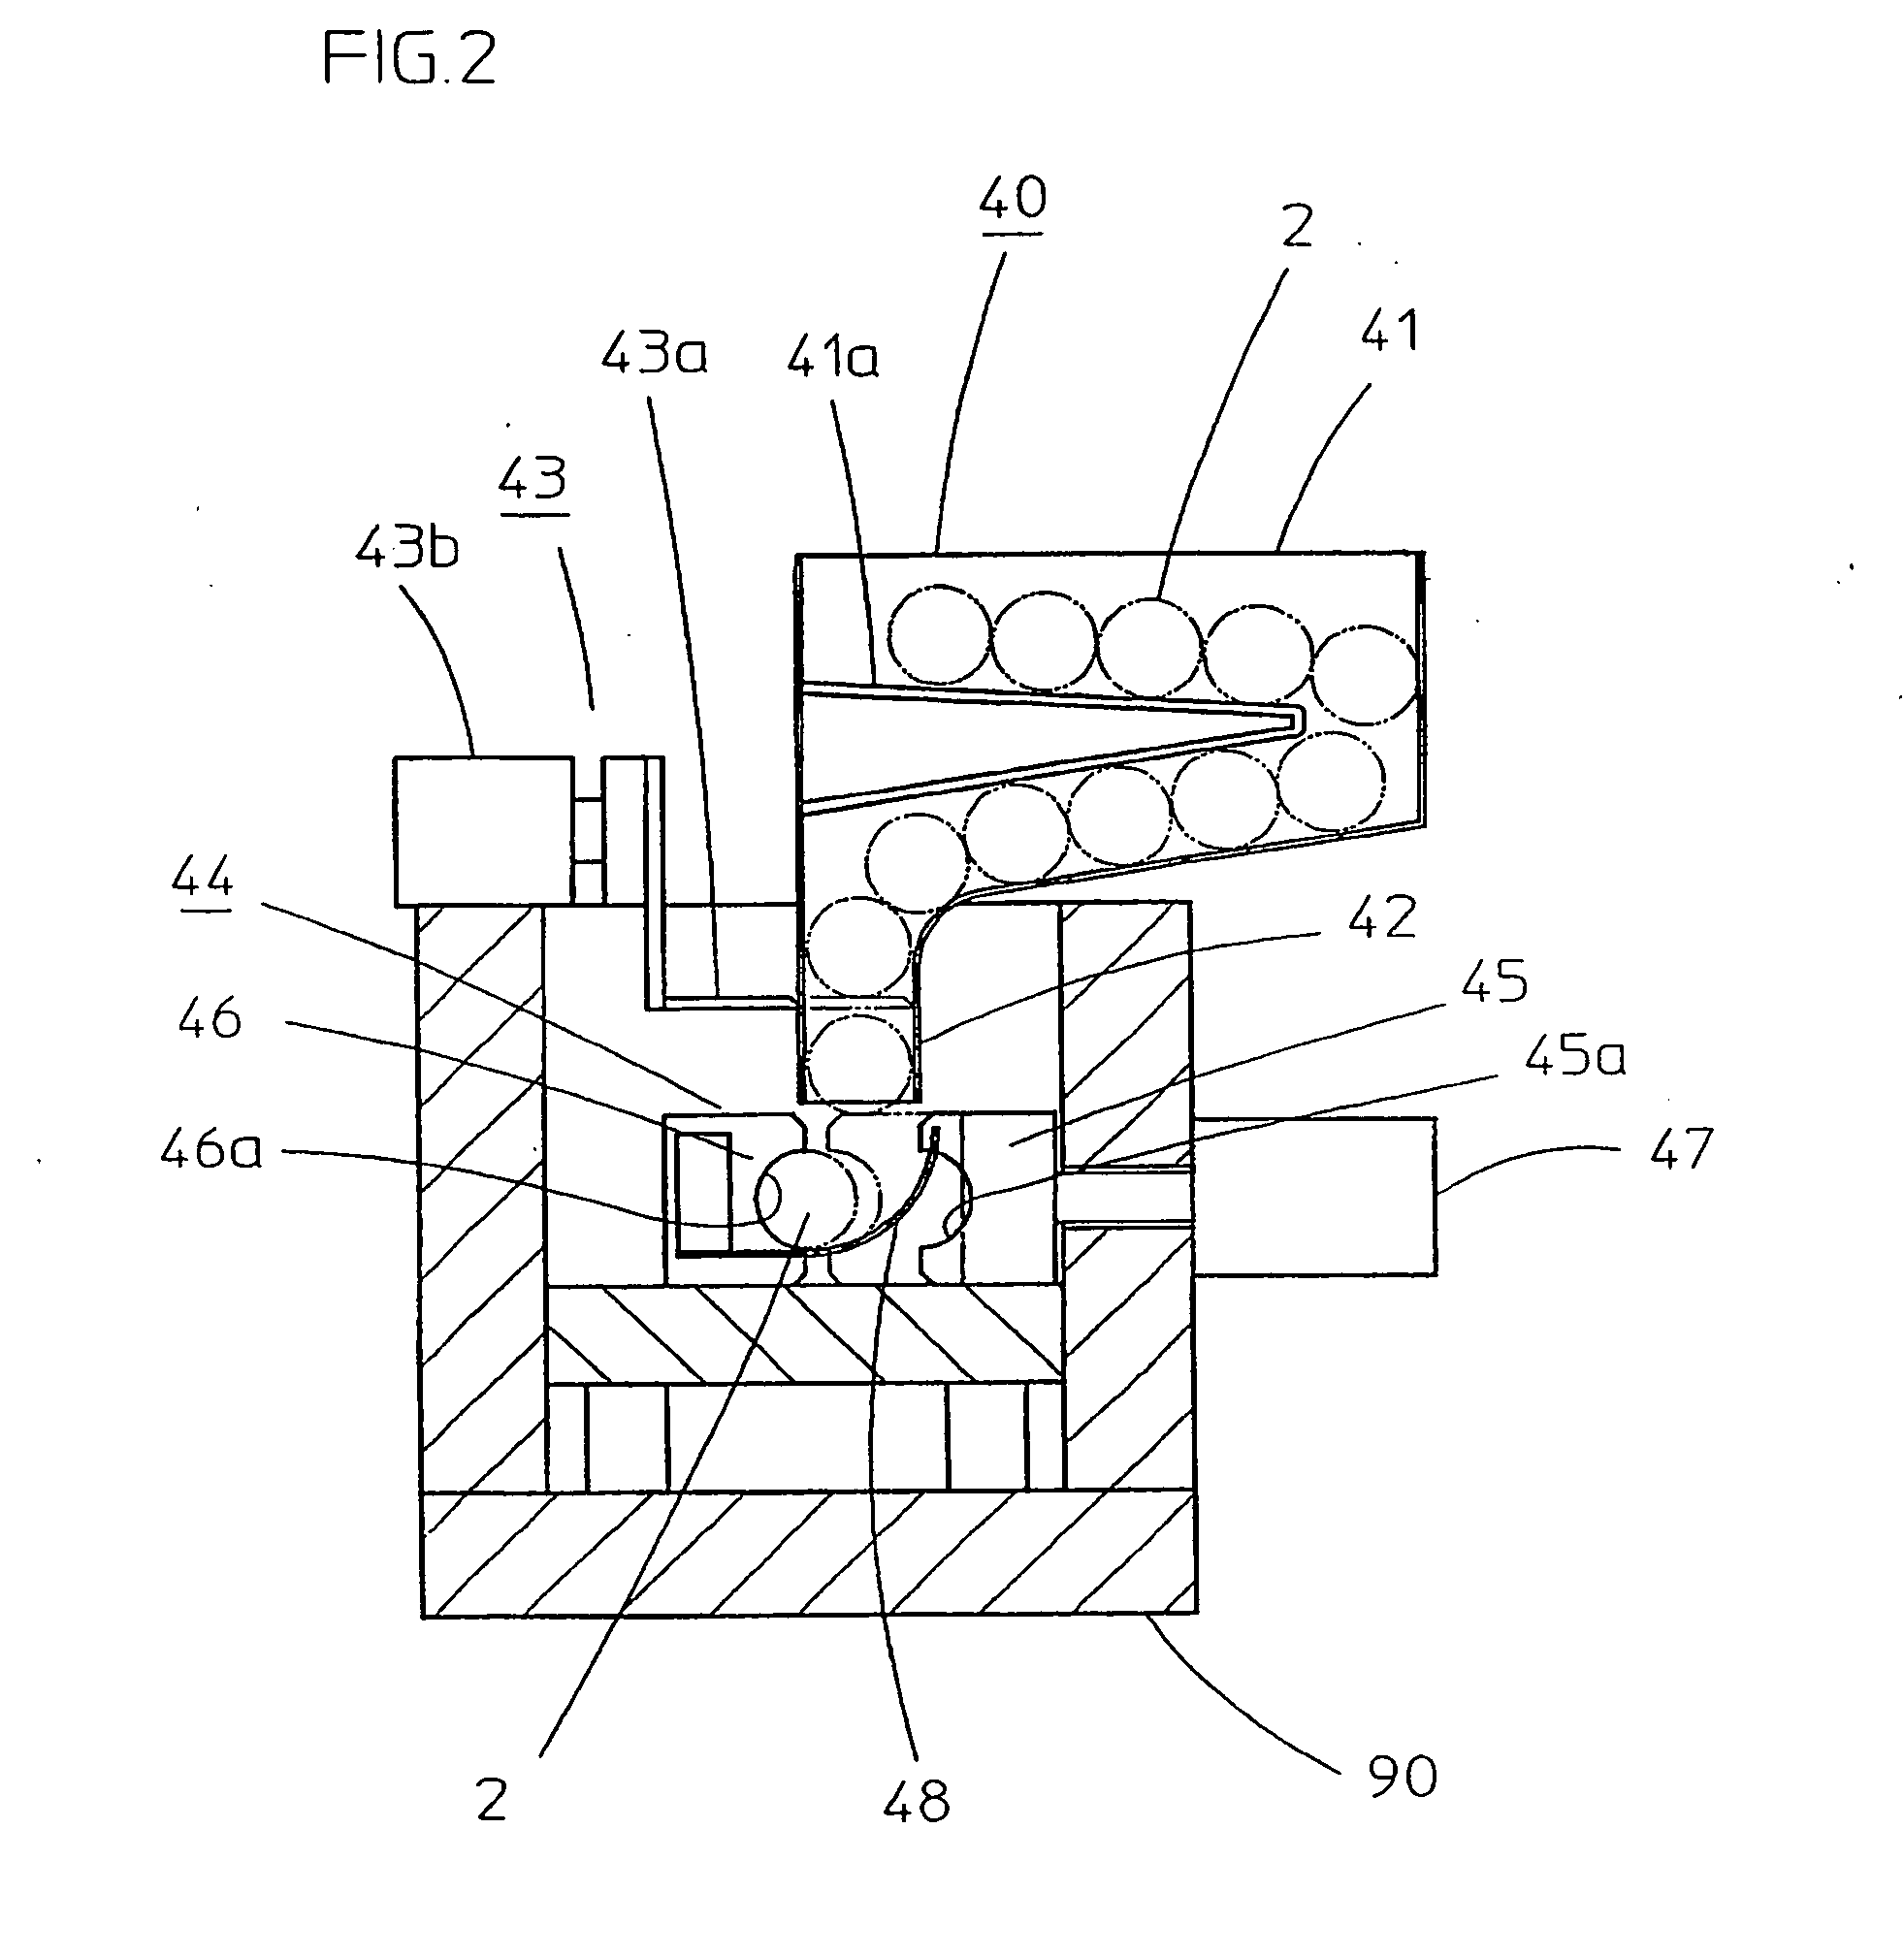 Injection device for light metal injection molding machine